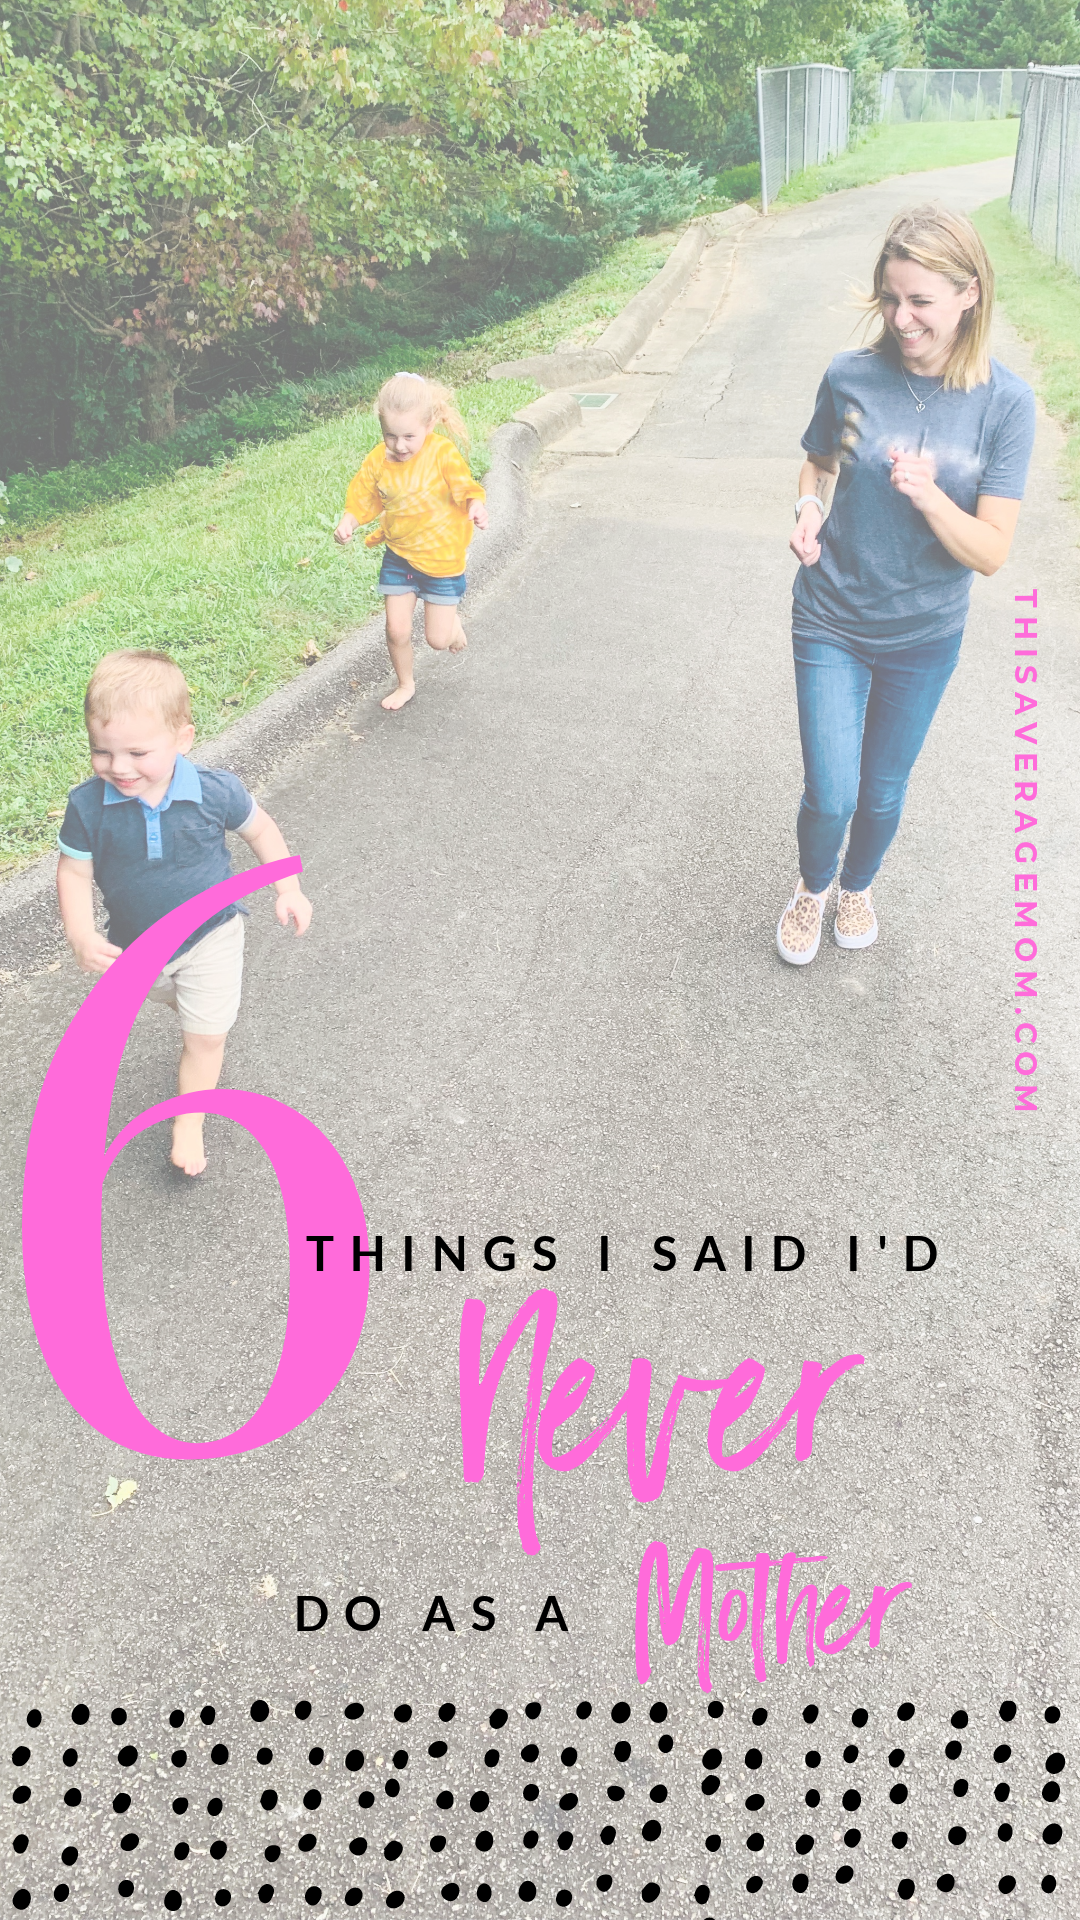 Before you had kids, did you ever watch a mom and think to yourself, “I’d never let my kid do that!” If so, you’re not alone. Here’s 6 things I said I’d never do as a mother that (spoiler alert) I totally believe in now. #motherhood #momlife